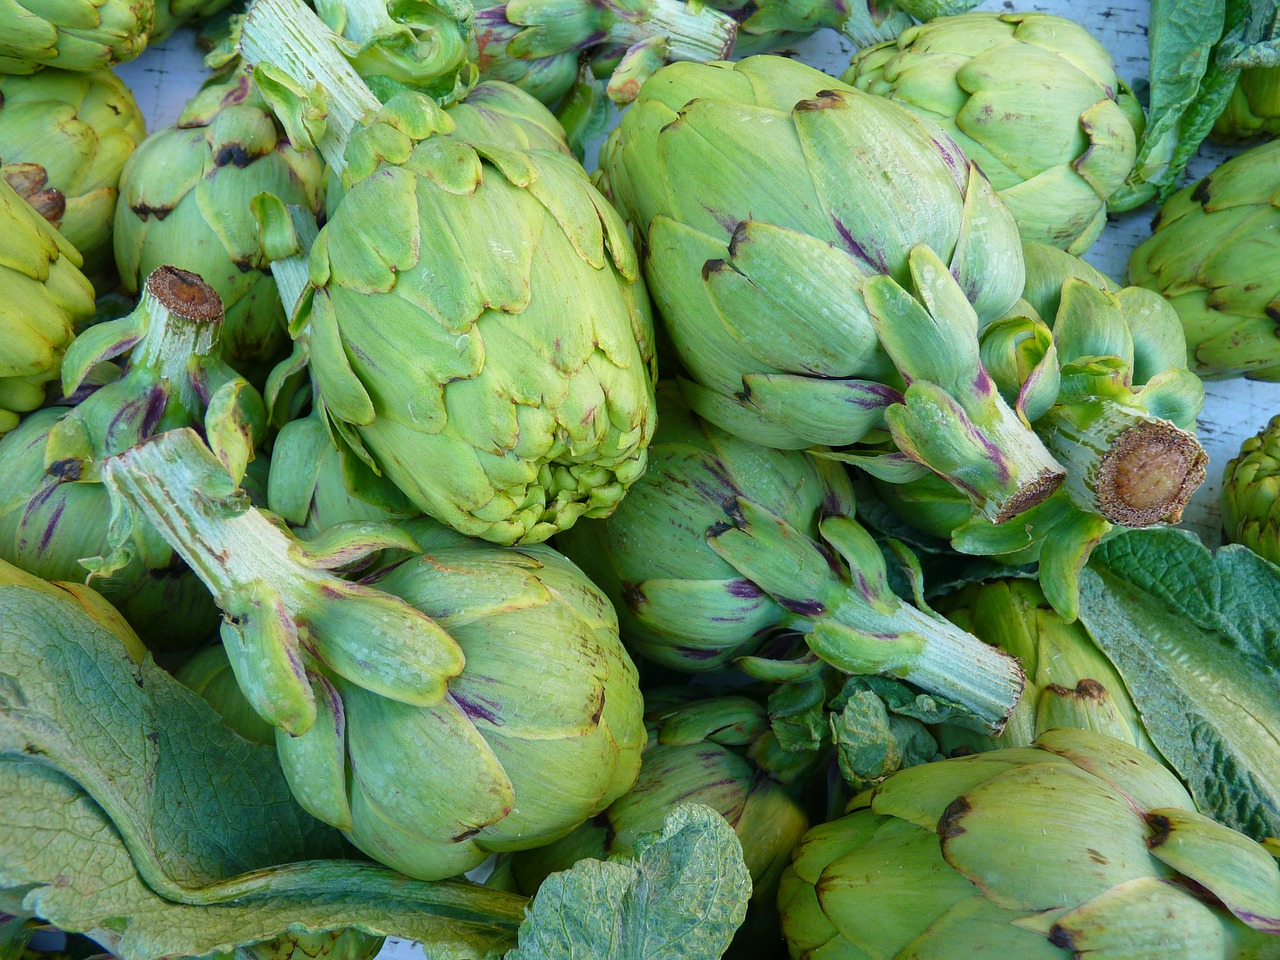 artichokes,vegetables,green,market,food,free pictures, free photos, free images, royalty free, free illustrations, public domain